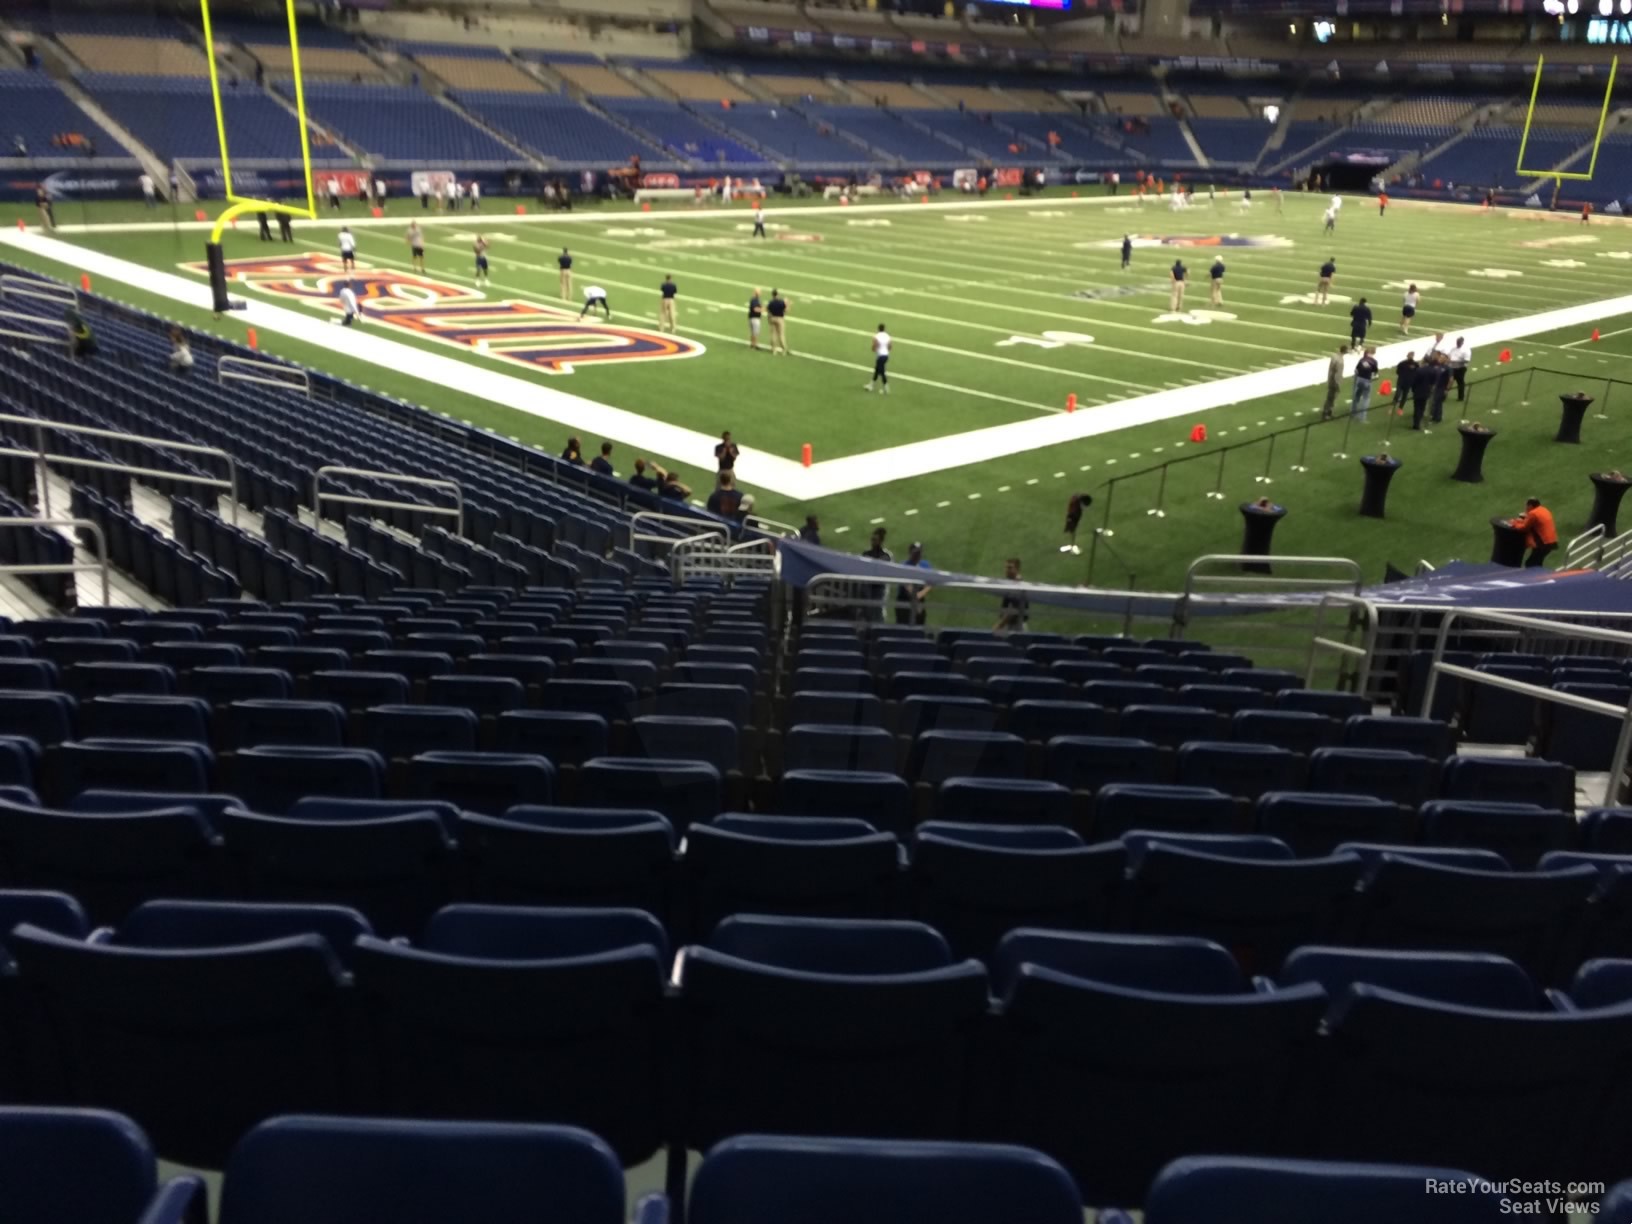 section 141, row 18 seat view  for football - alamodome